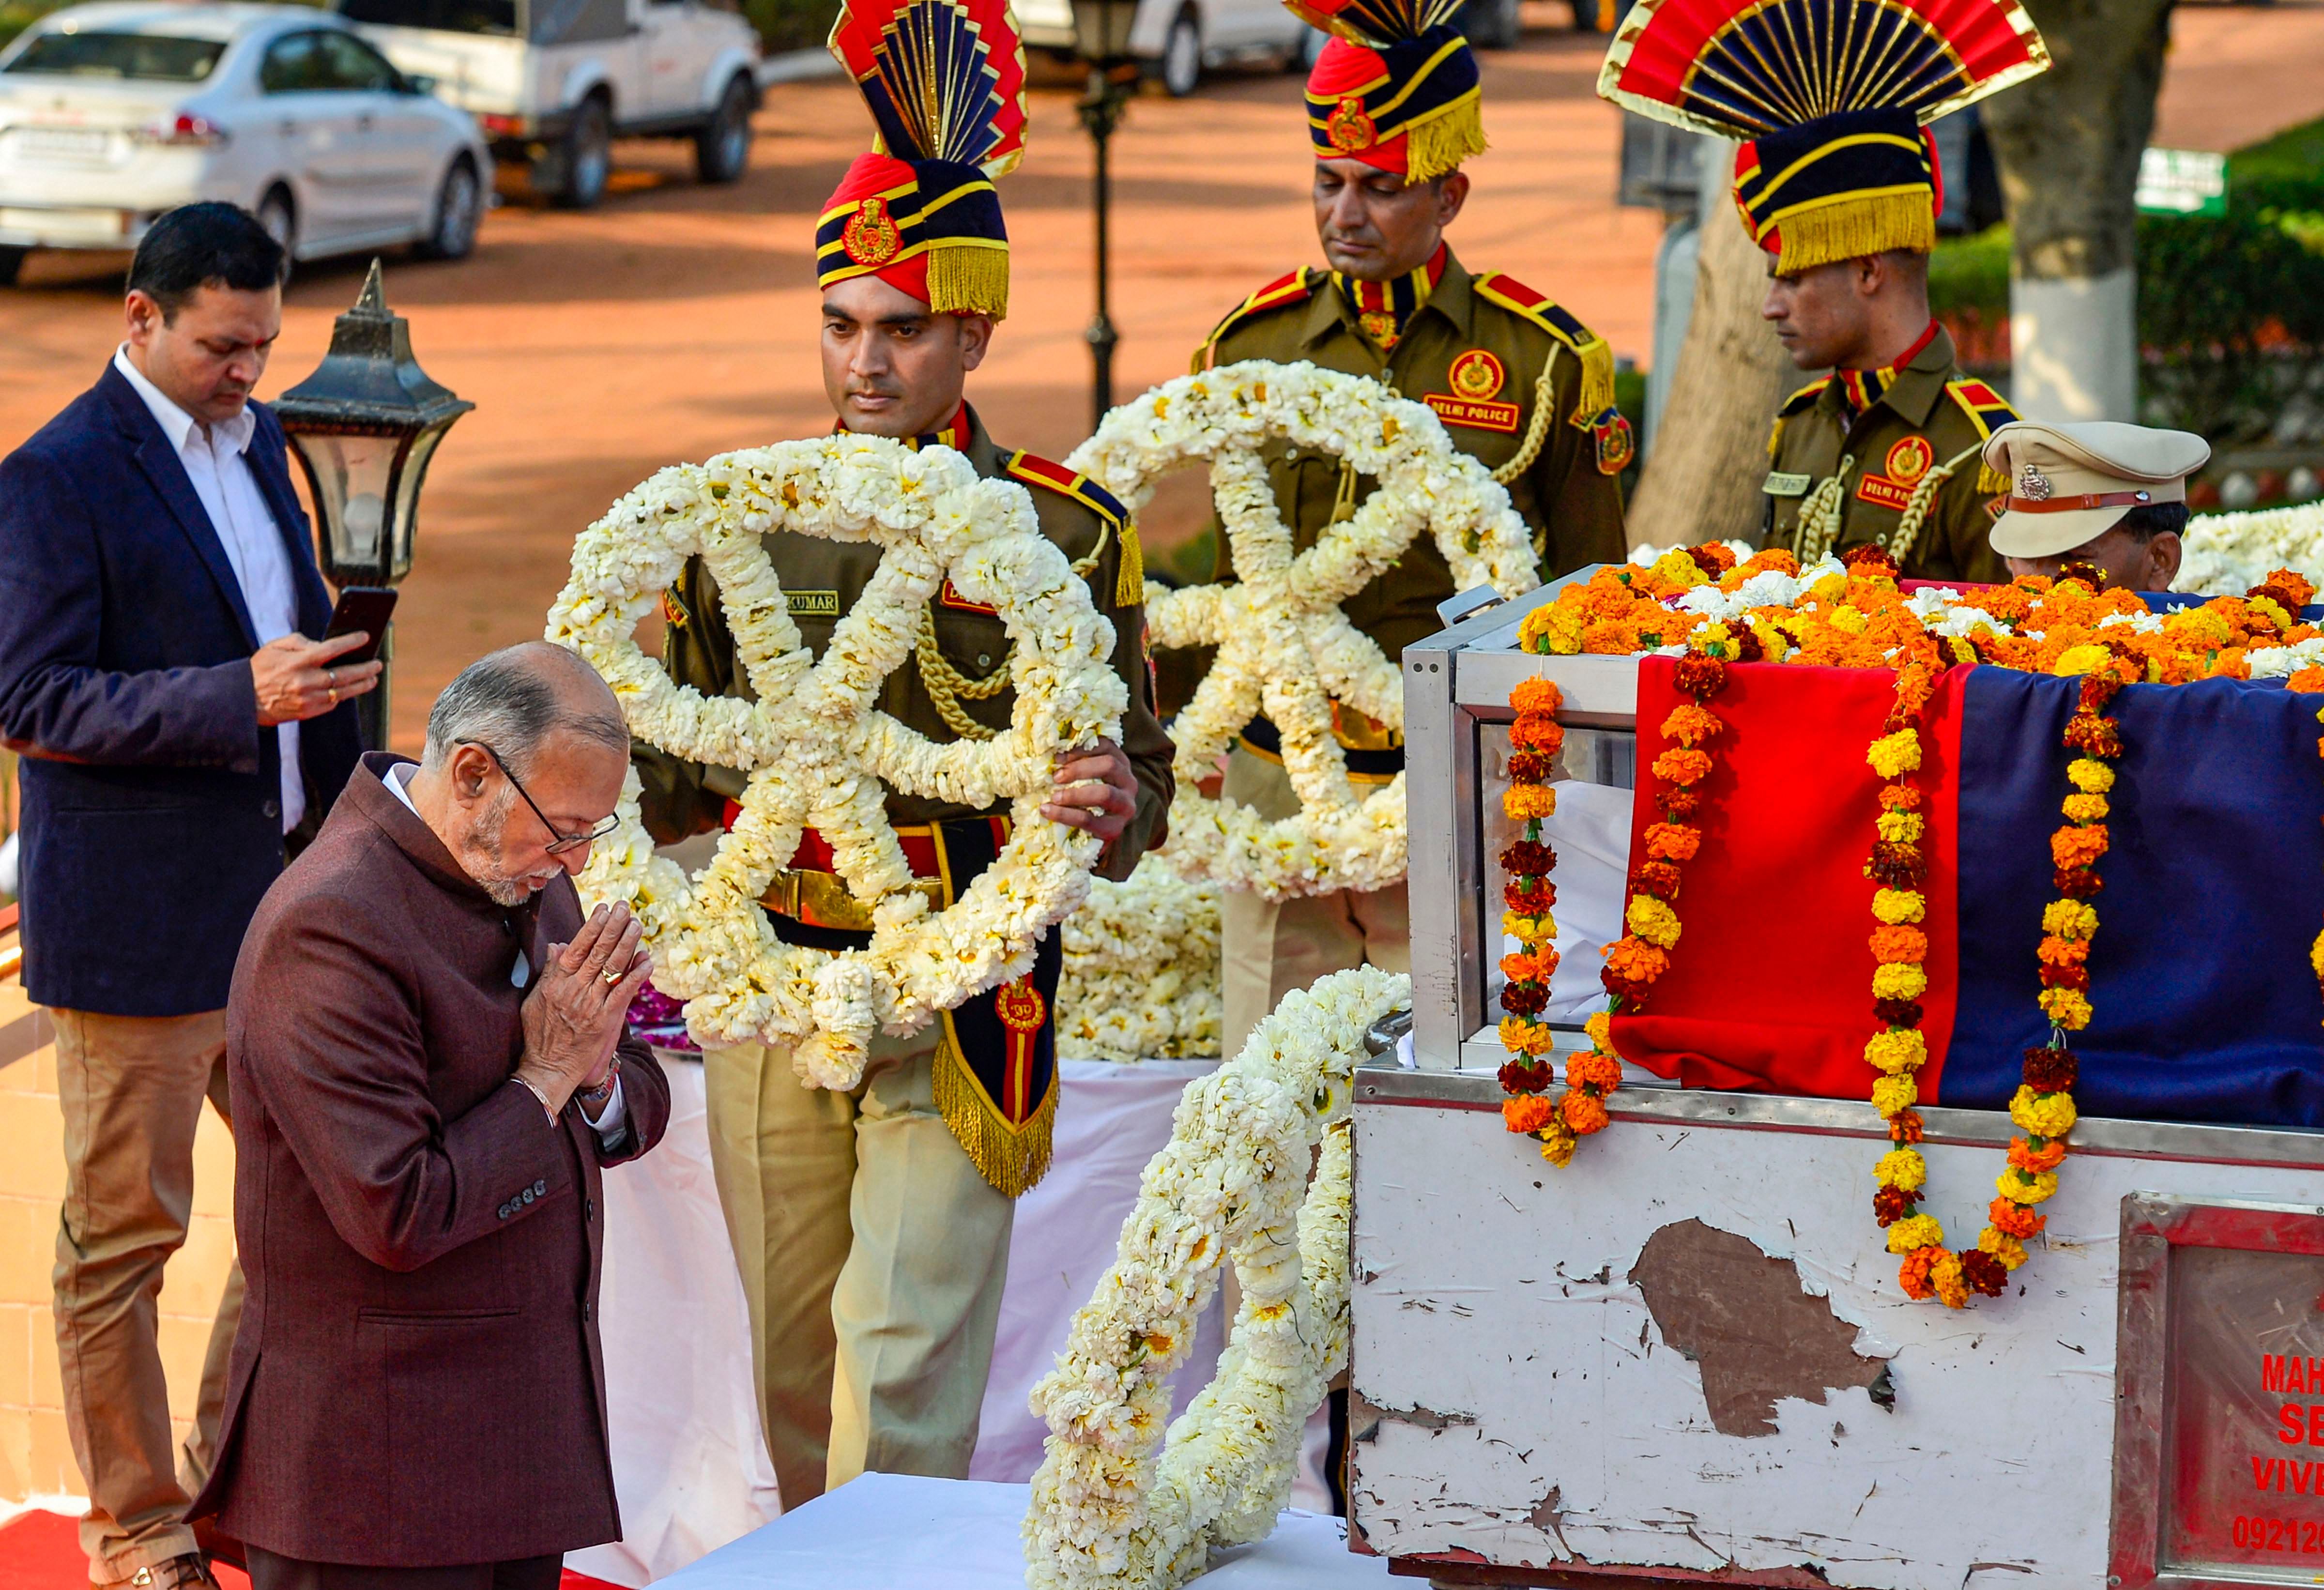 Delhi LG Anil Baijal pays his last respects to the mortal remains of police inspector Ratan Lal at Shaheed Smarak Sthal, in New Delhi, Tuesday, Feb 25, 2020. Ratan Lal was among those killed in the violence that erupted on Monday over the amended citizenship law. (PTI Photo)